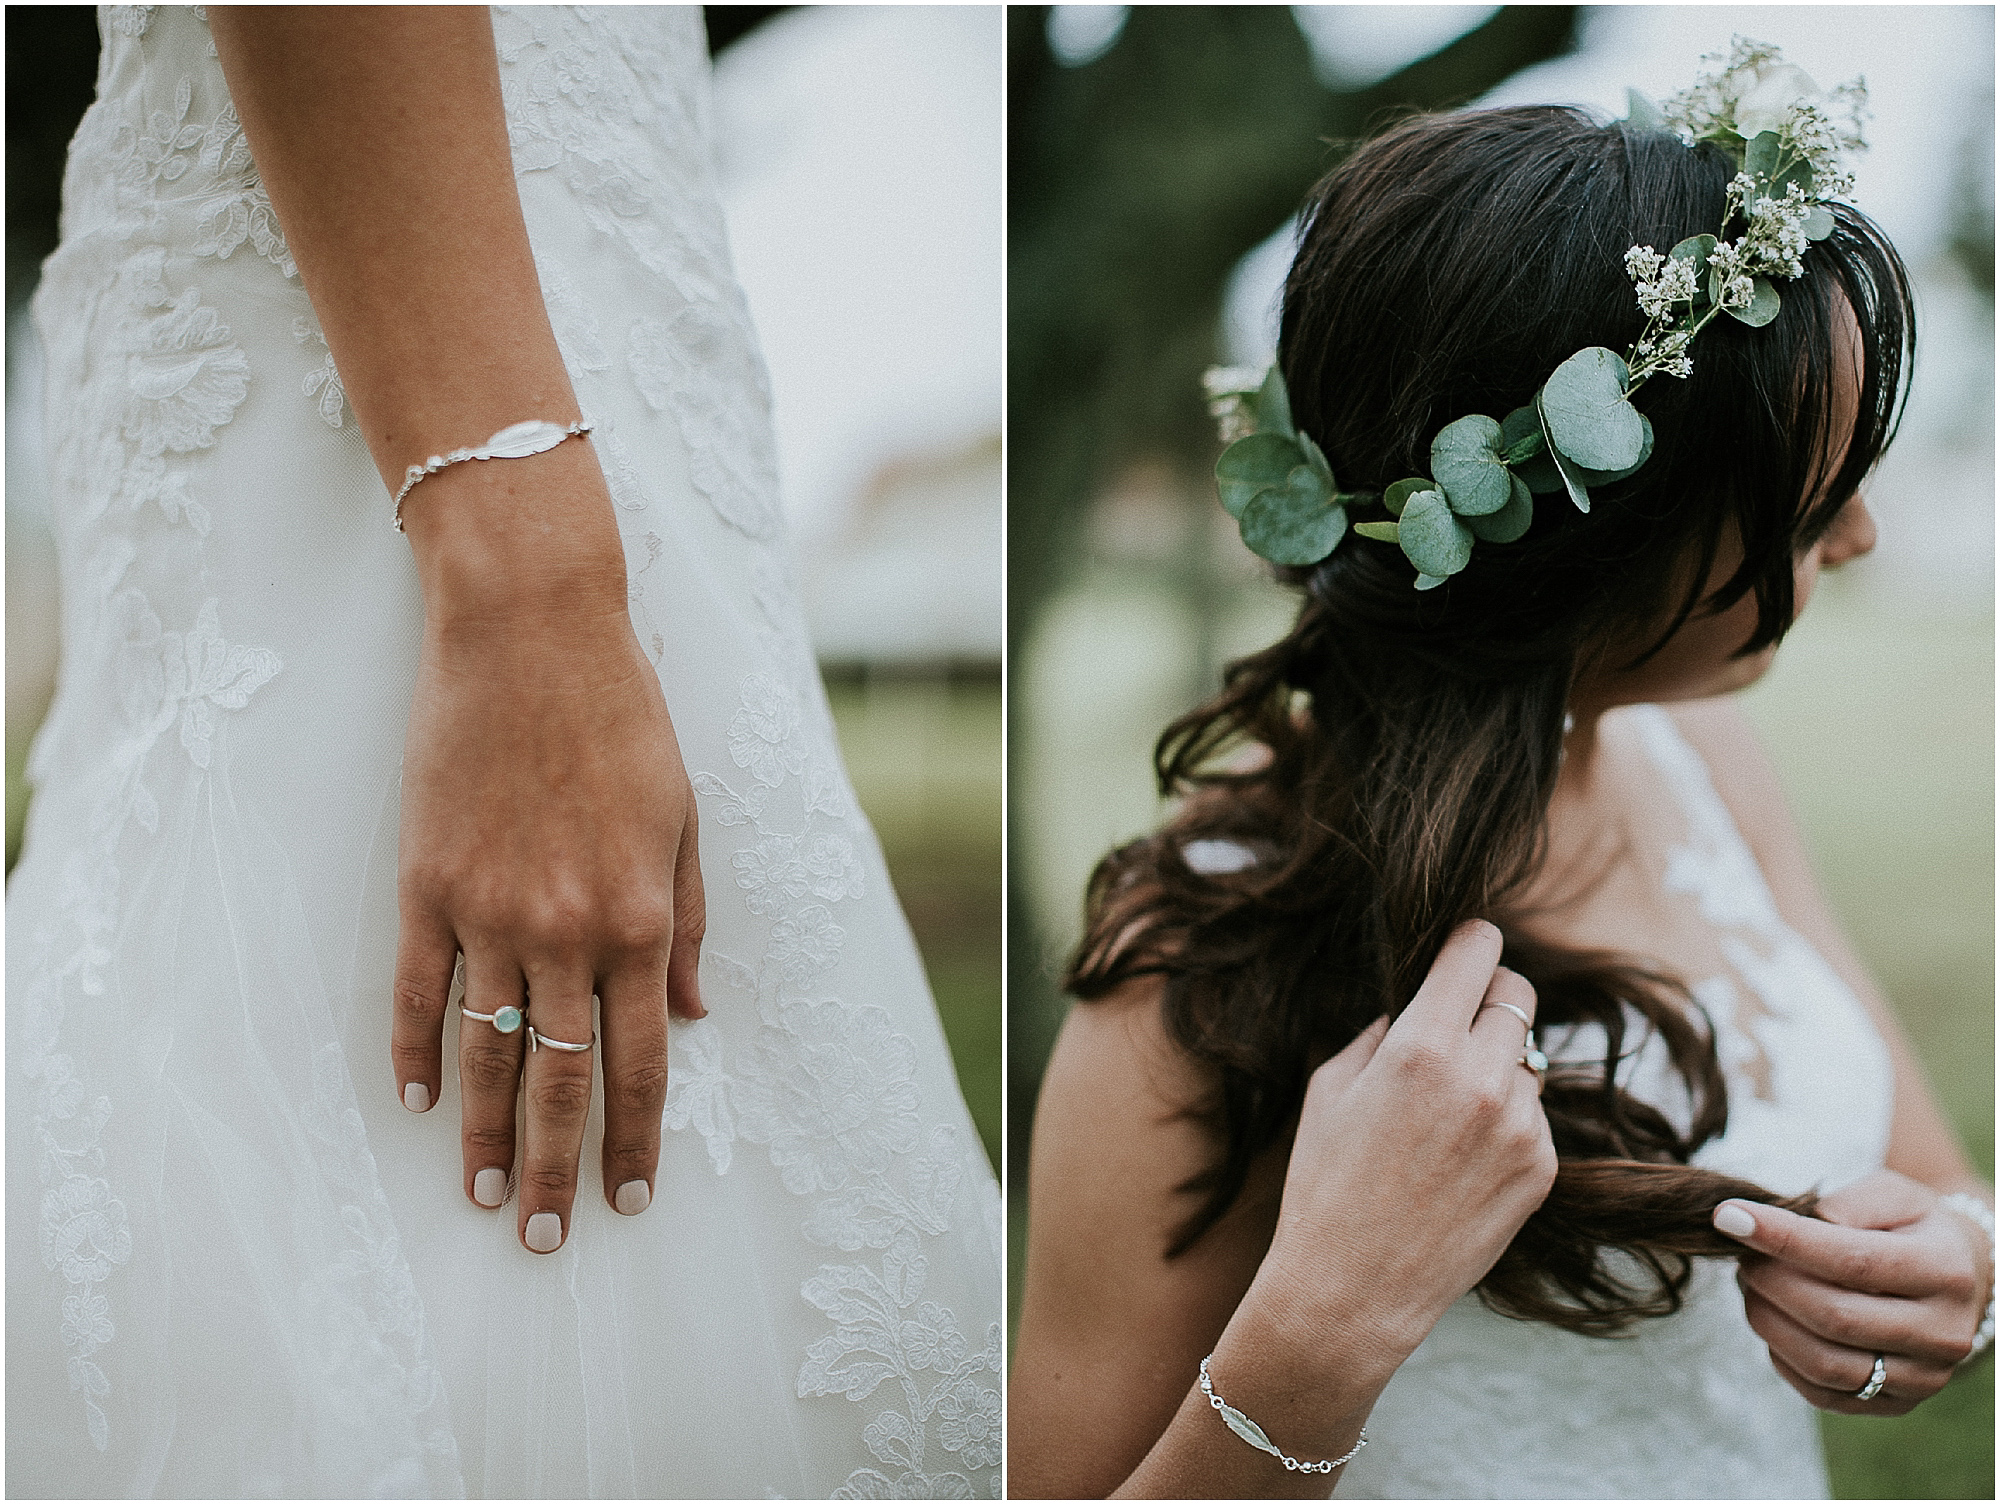 Outdoor-Forest-Destination-Wedding-Photographer-Maryke-Albertyn-Photography-Looks-Like-Film-Authentic-Alternative-Cape-Town-Pretoria-Silver-Sixpence-Dullstroom-Bridal-Portraits-Flower-Crown